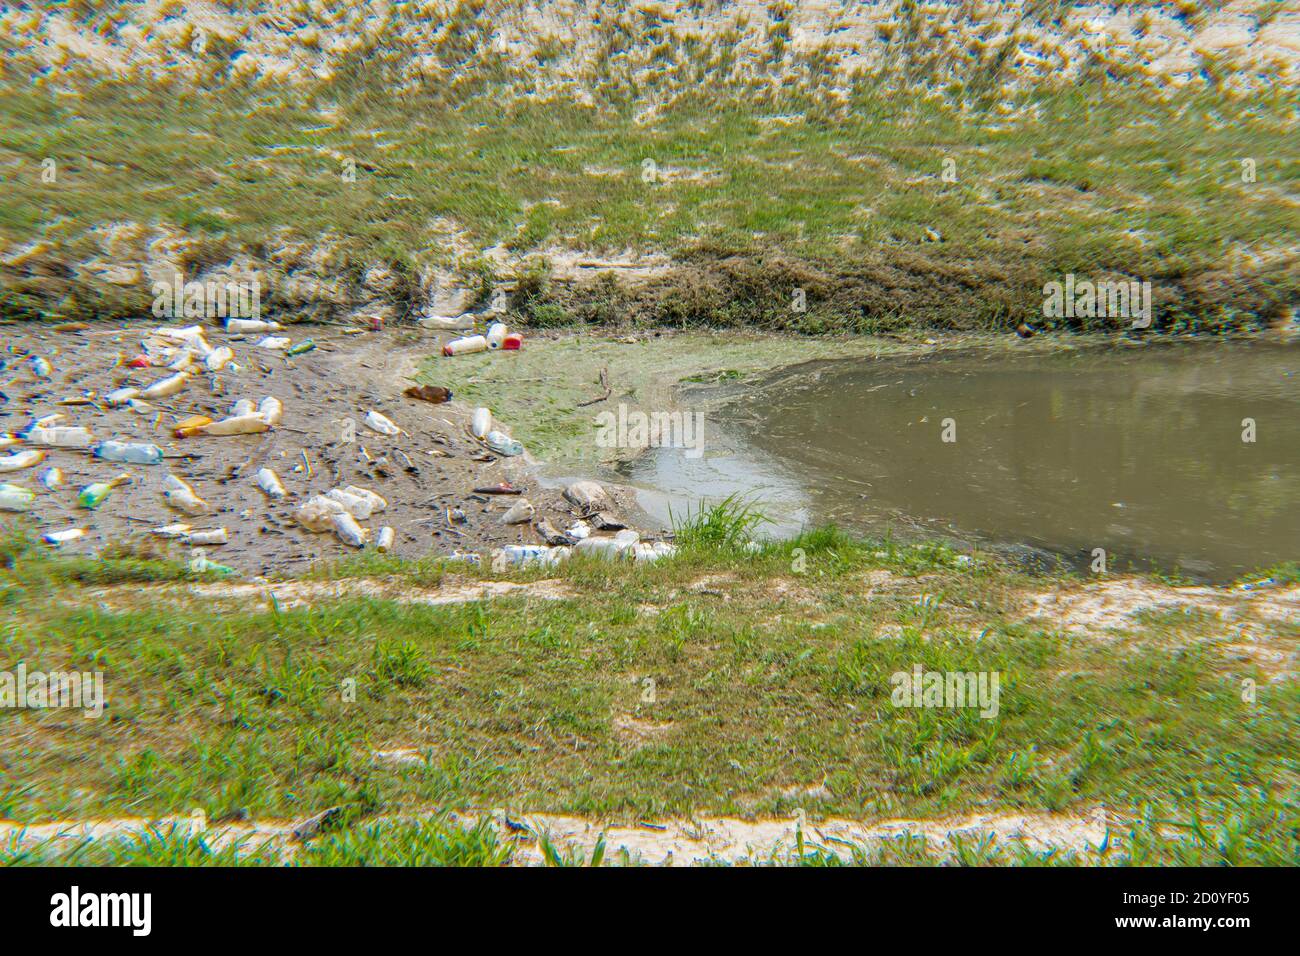 Garbage in the Belica river, July 2020. Jagodina, Serbia, Europe Stock Photo